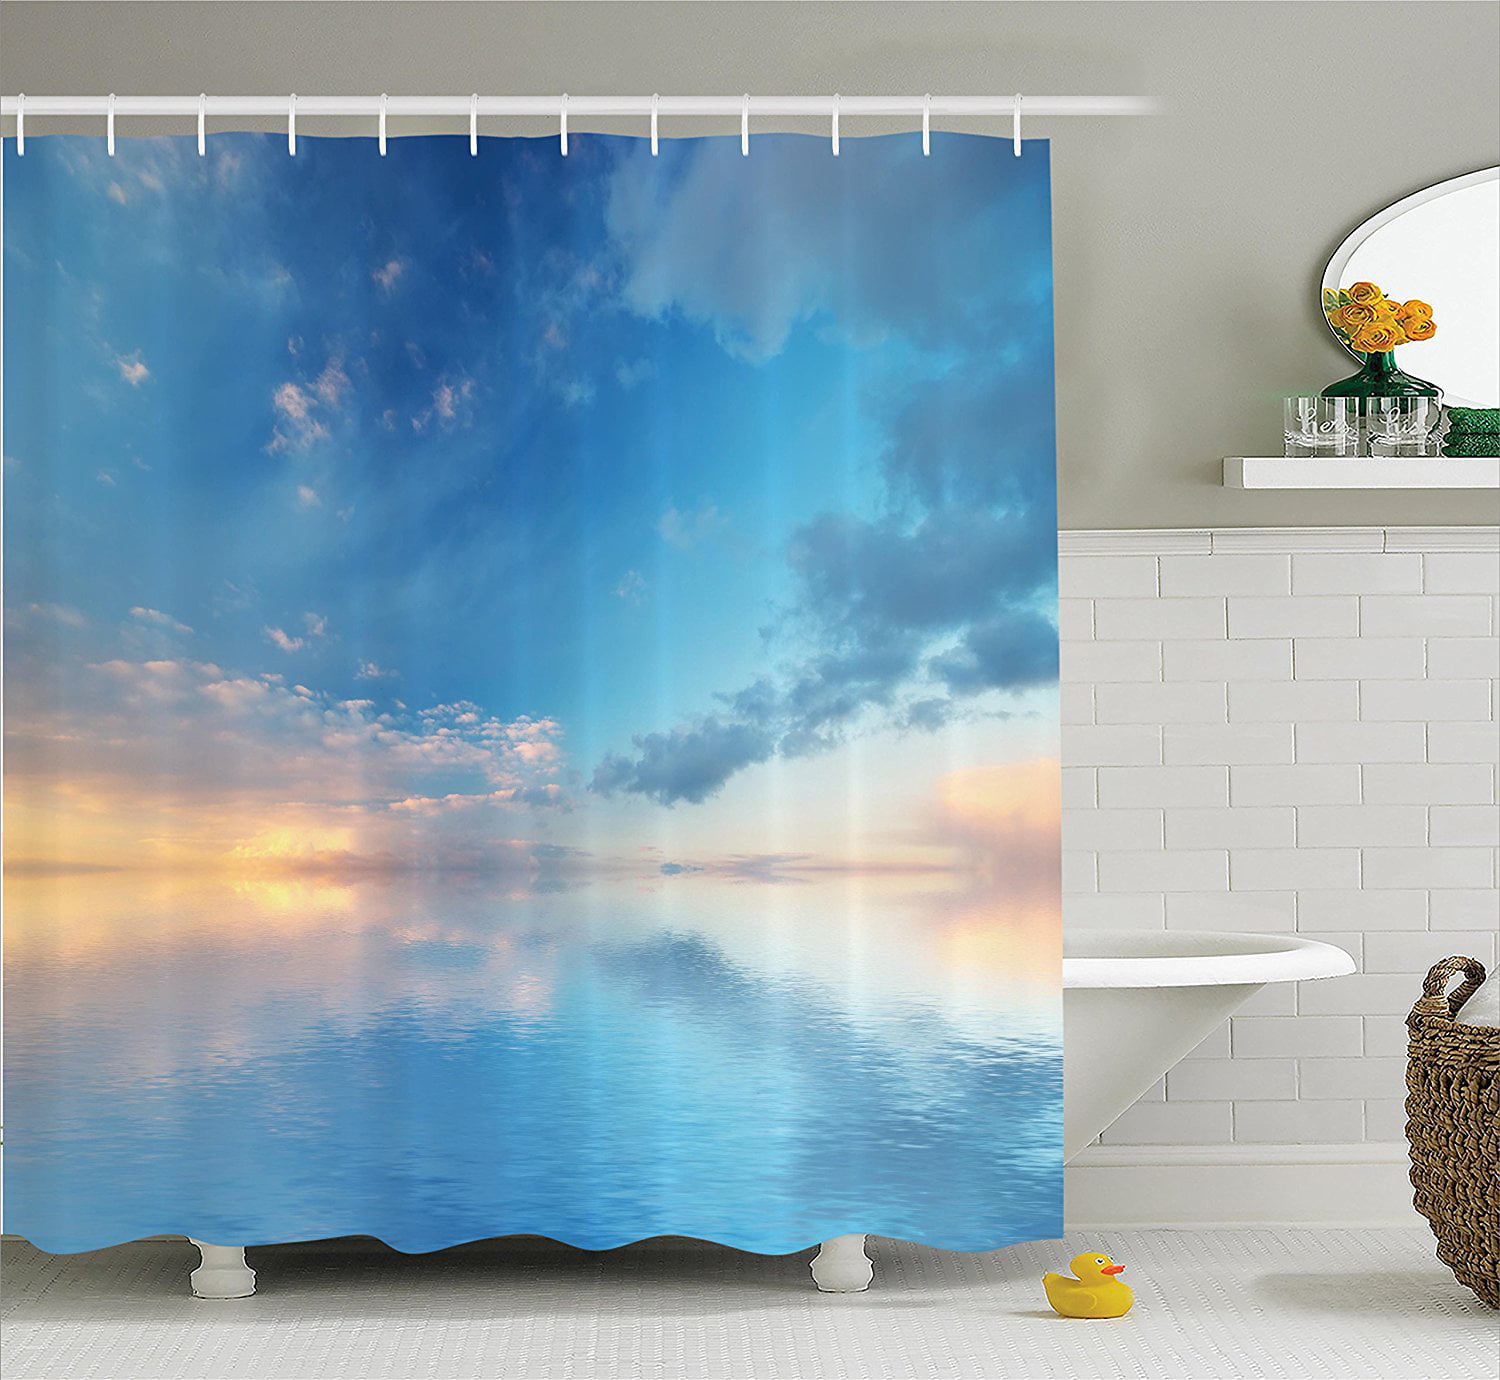 Details about   Fantasy Shower Curtain Orange Sky and Sea Decor Bathroom Waterproof 71inches 